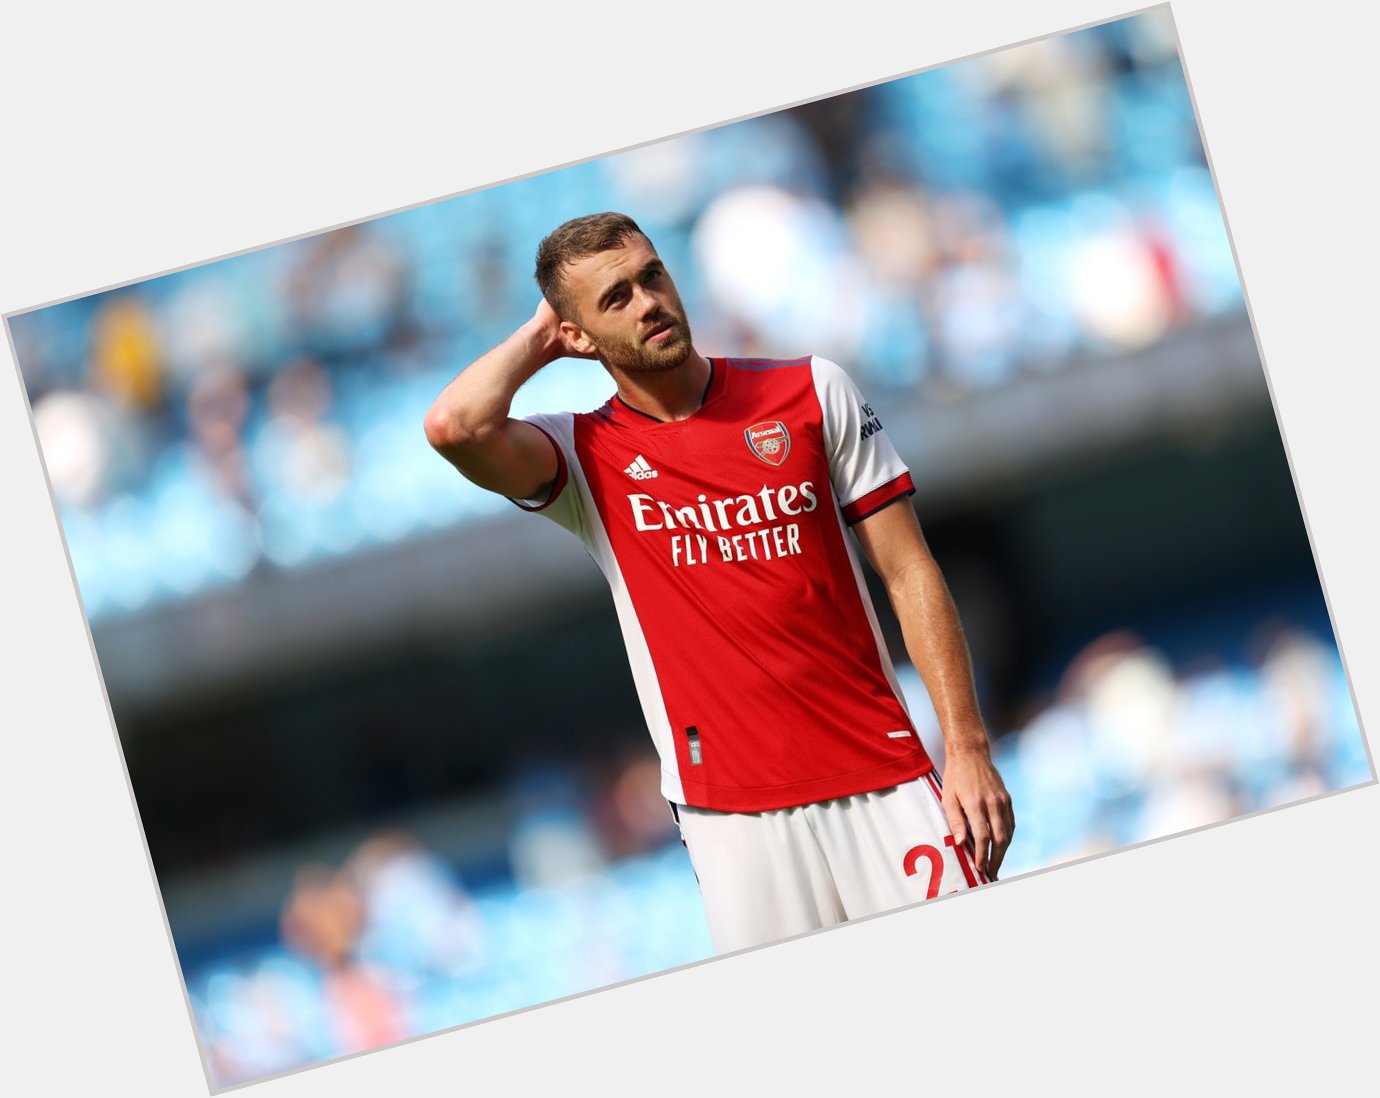 Happy 27th Birthday to Arsenal\s Calum Chambers!

Have a good one,   